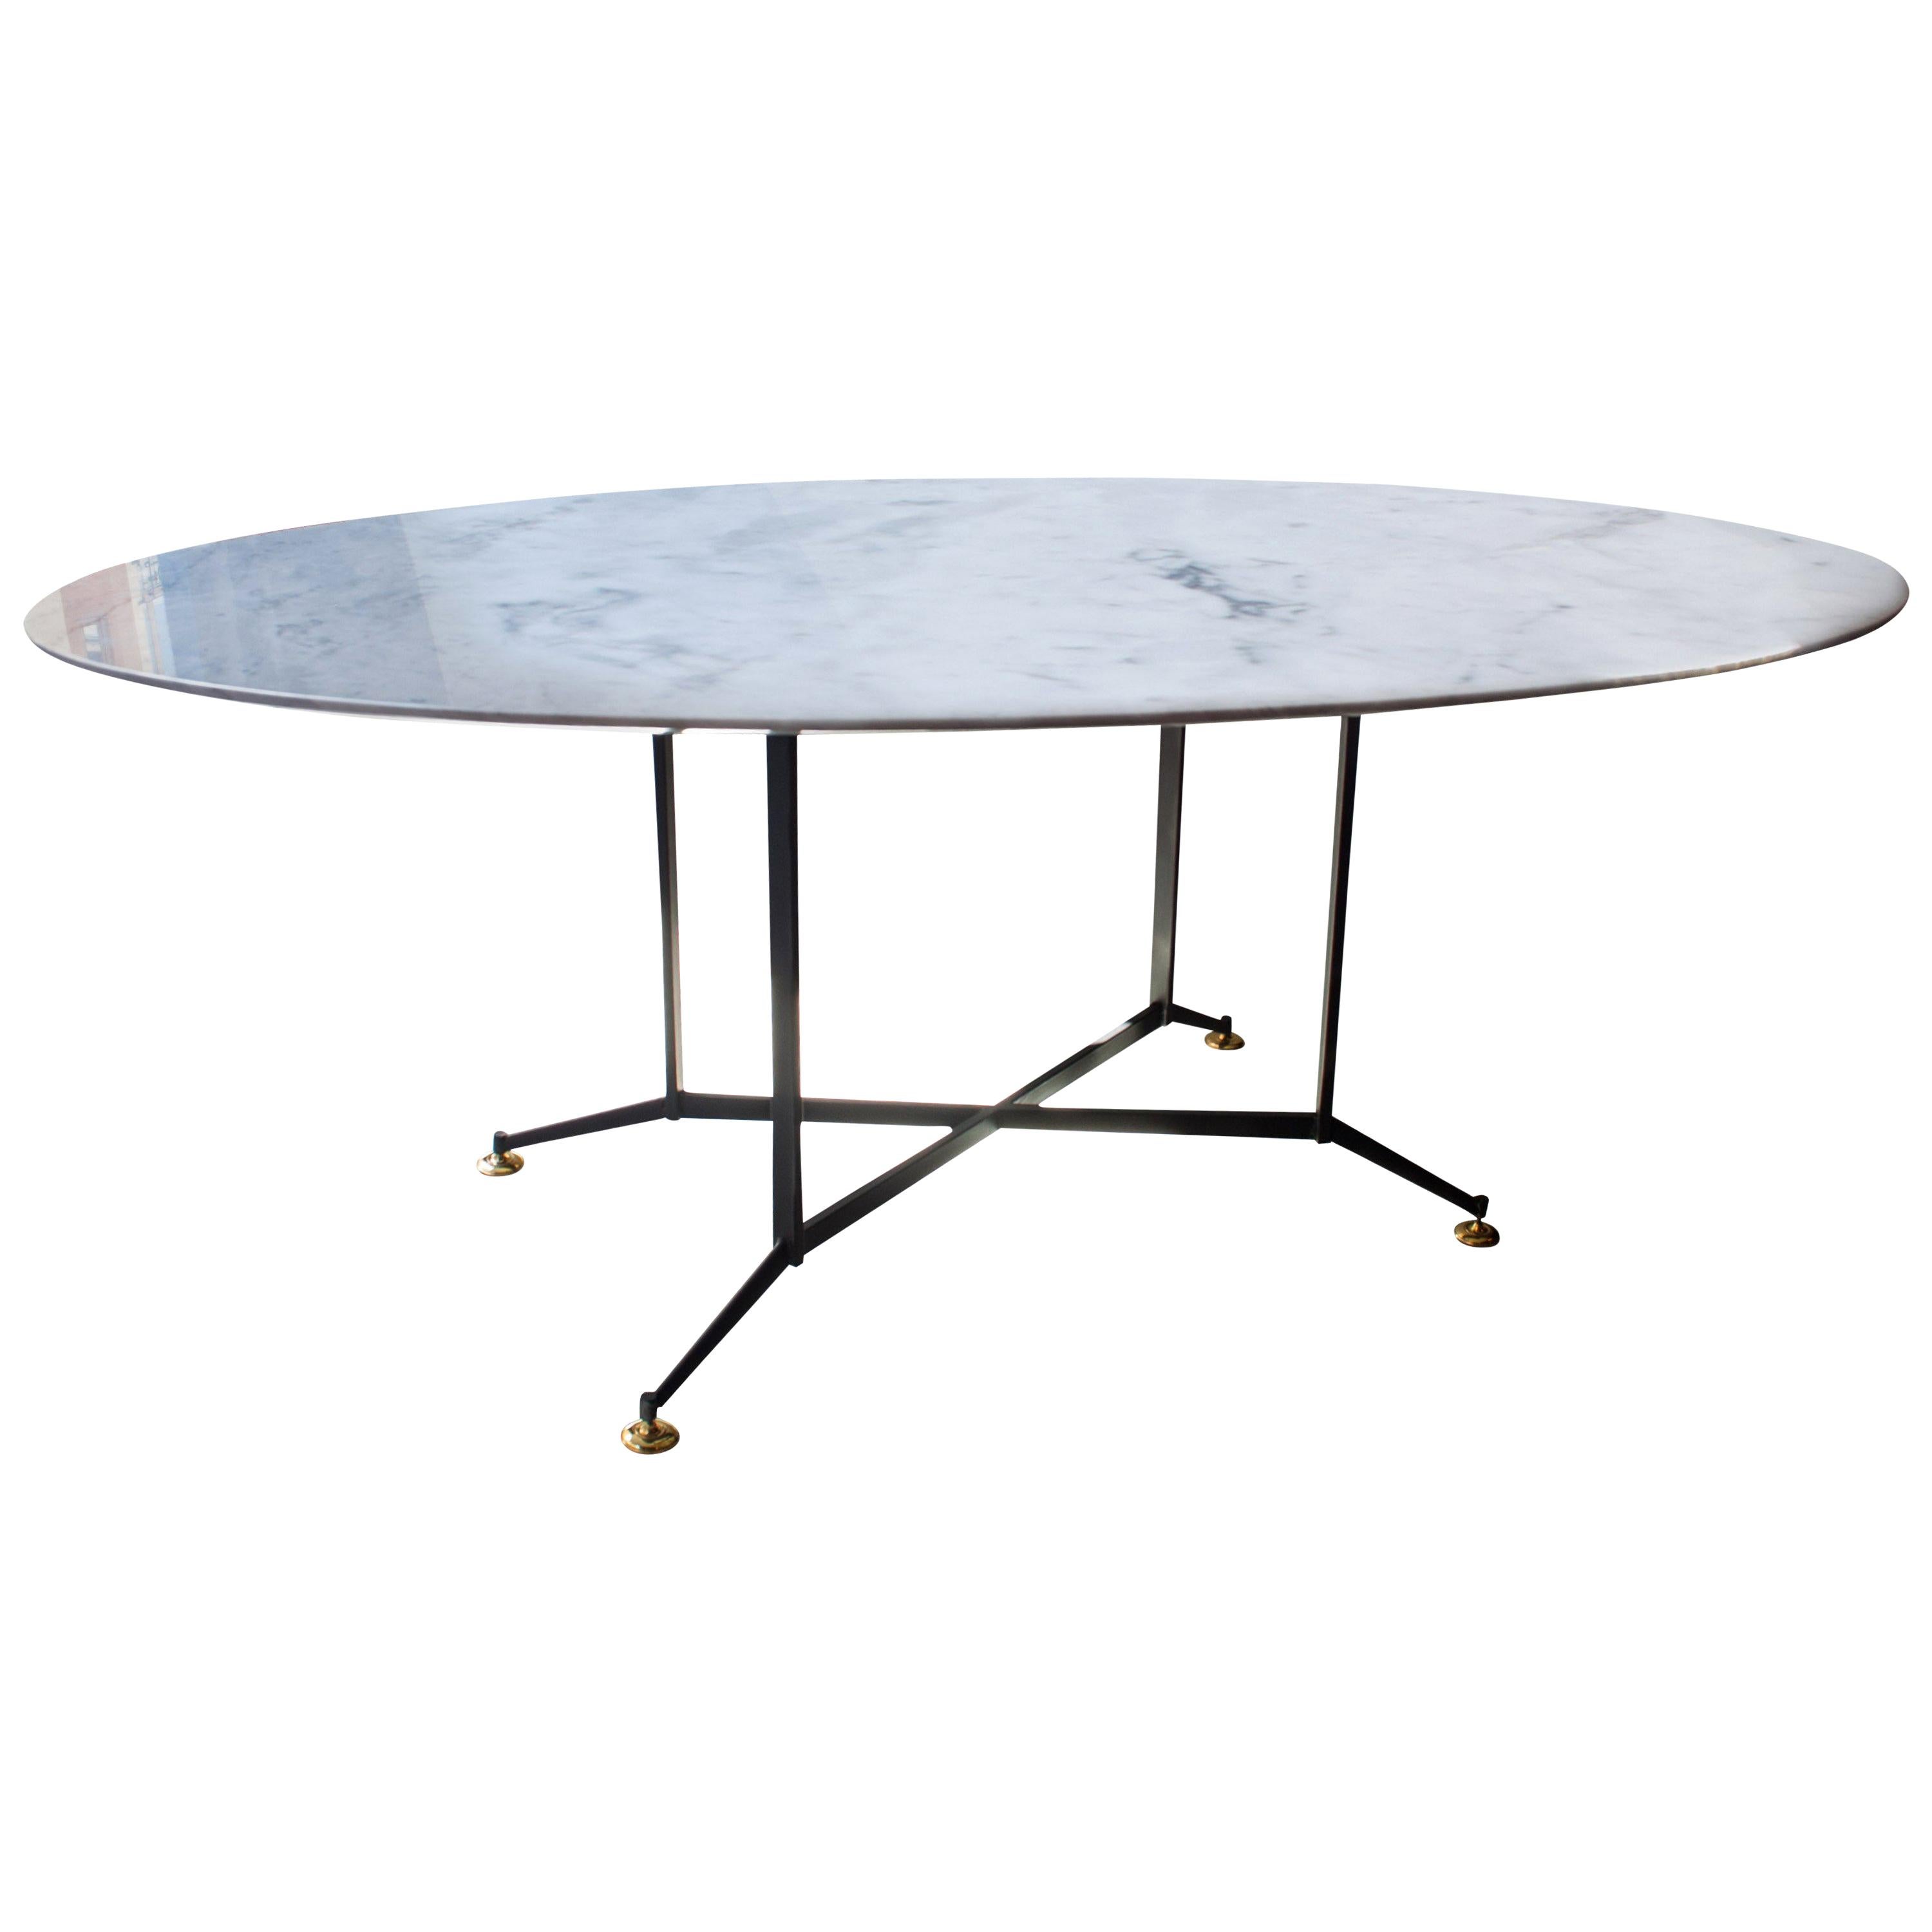 Midcentury Style Carrara Marble Oval Dining Table, Italy, 1950